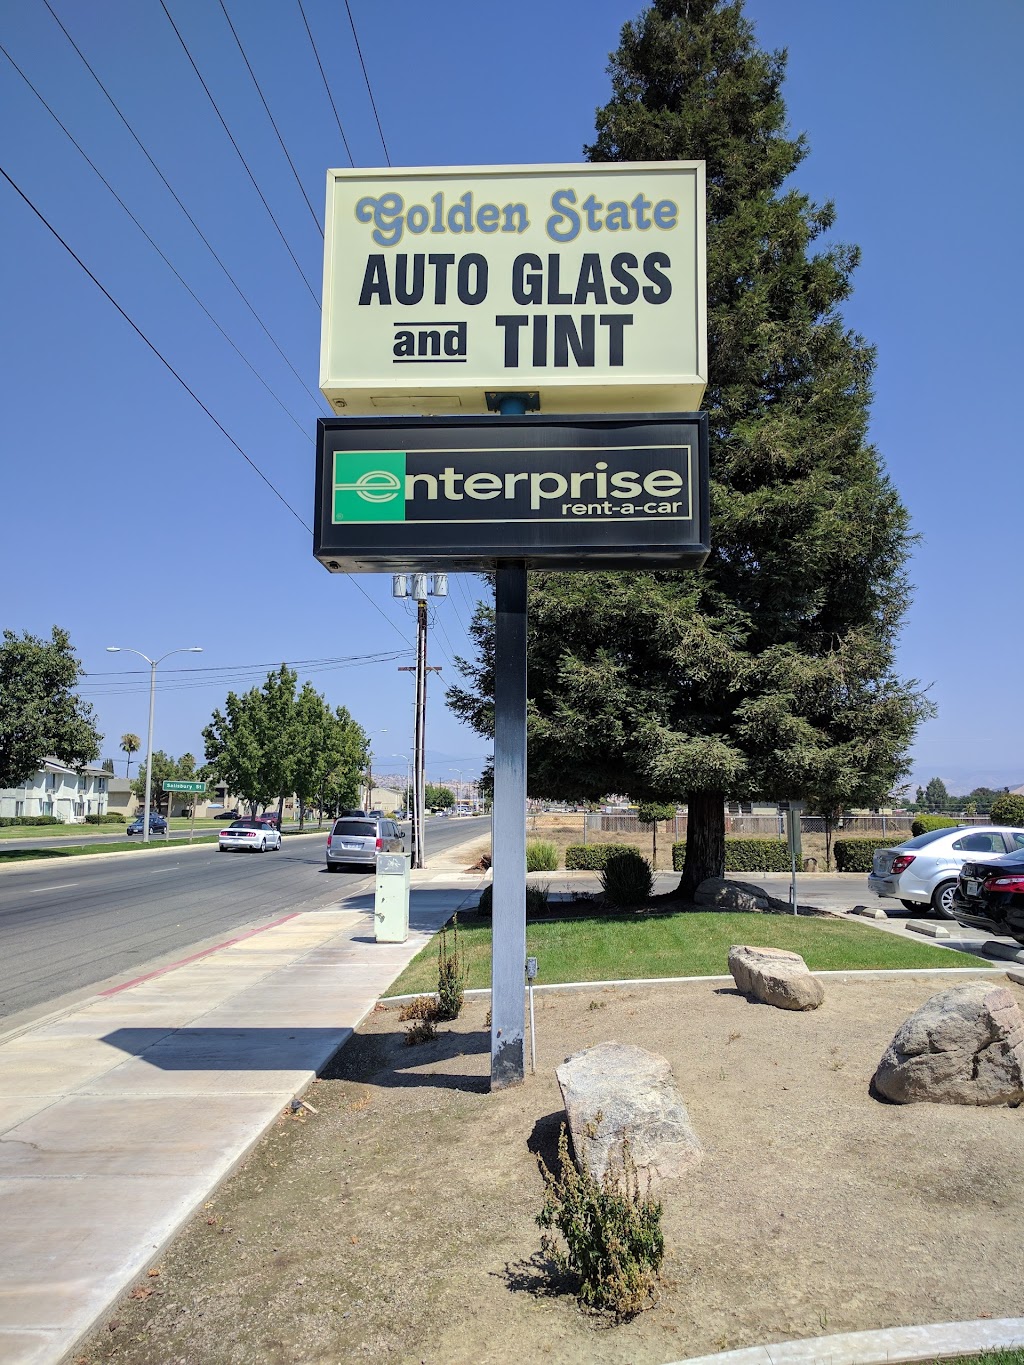 Golden State Auto Glass and Tint | 1905 W Olive Ave, Porterville, CA 93257, USA | Phone: (559) 782-1985